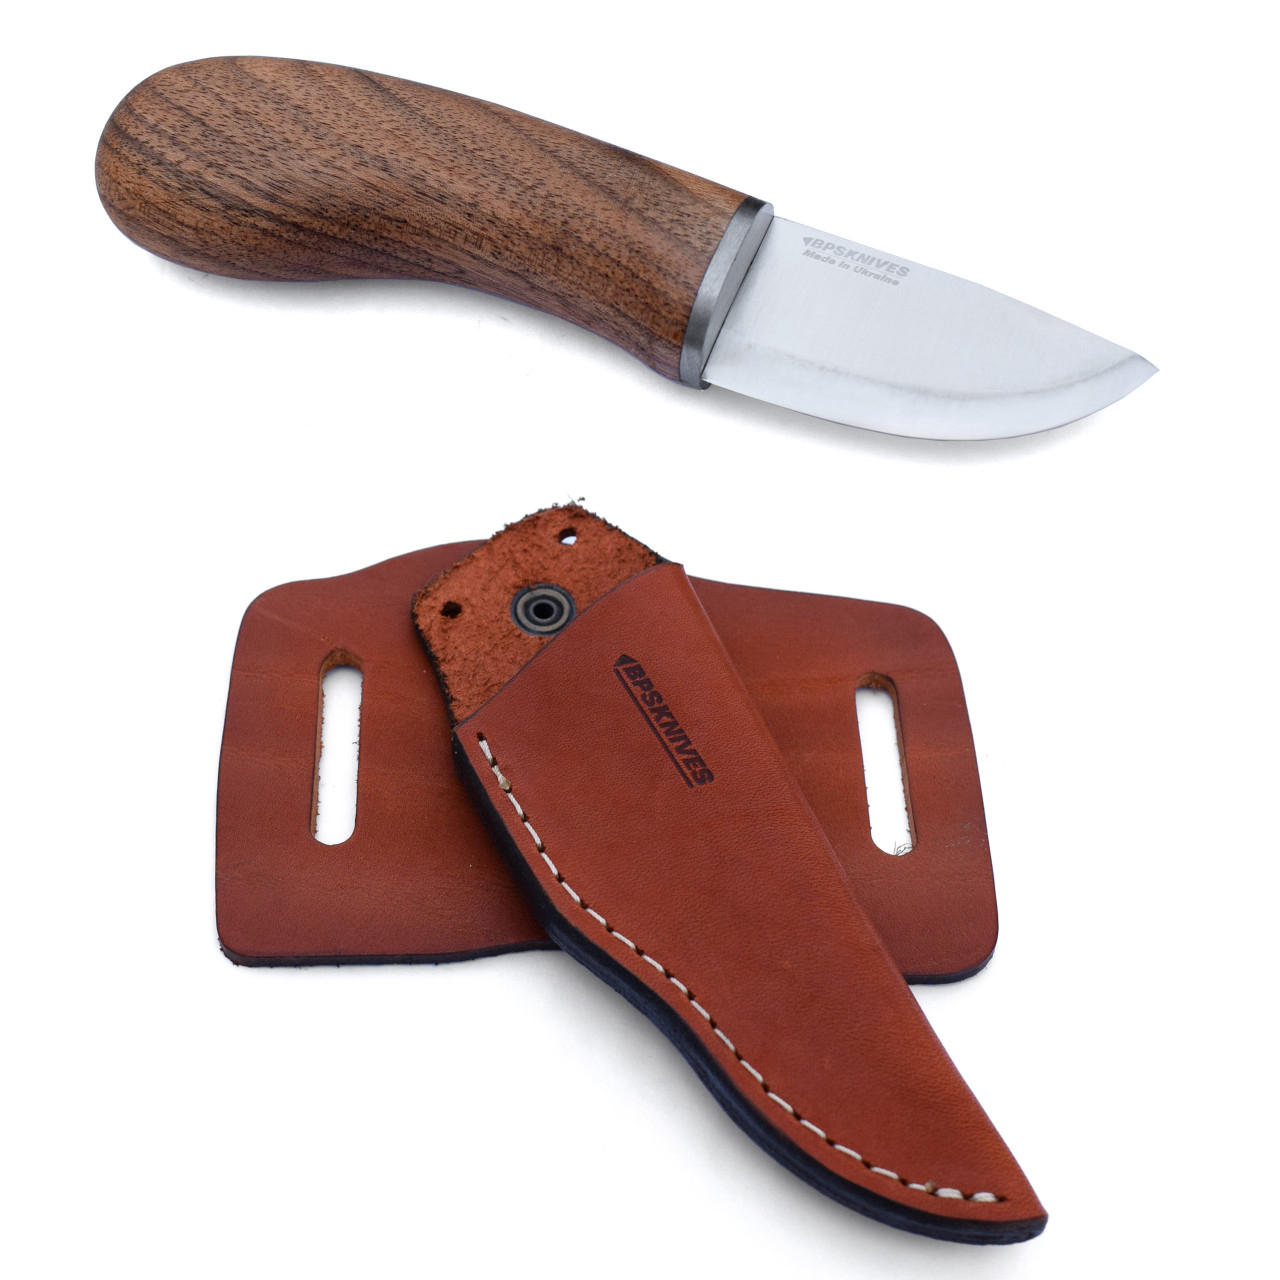 product image for BPS Knives MK 1 Fixed Blade Stainless Steel Knife with Walnut Wood Handle